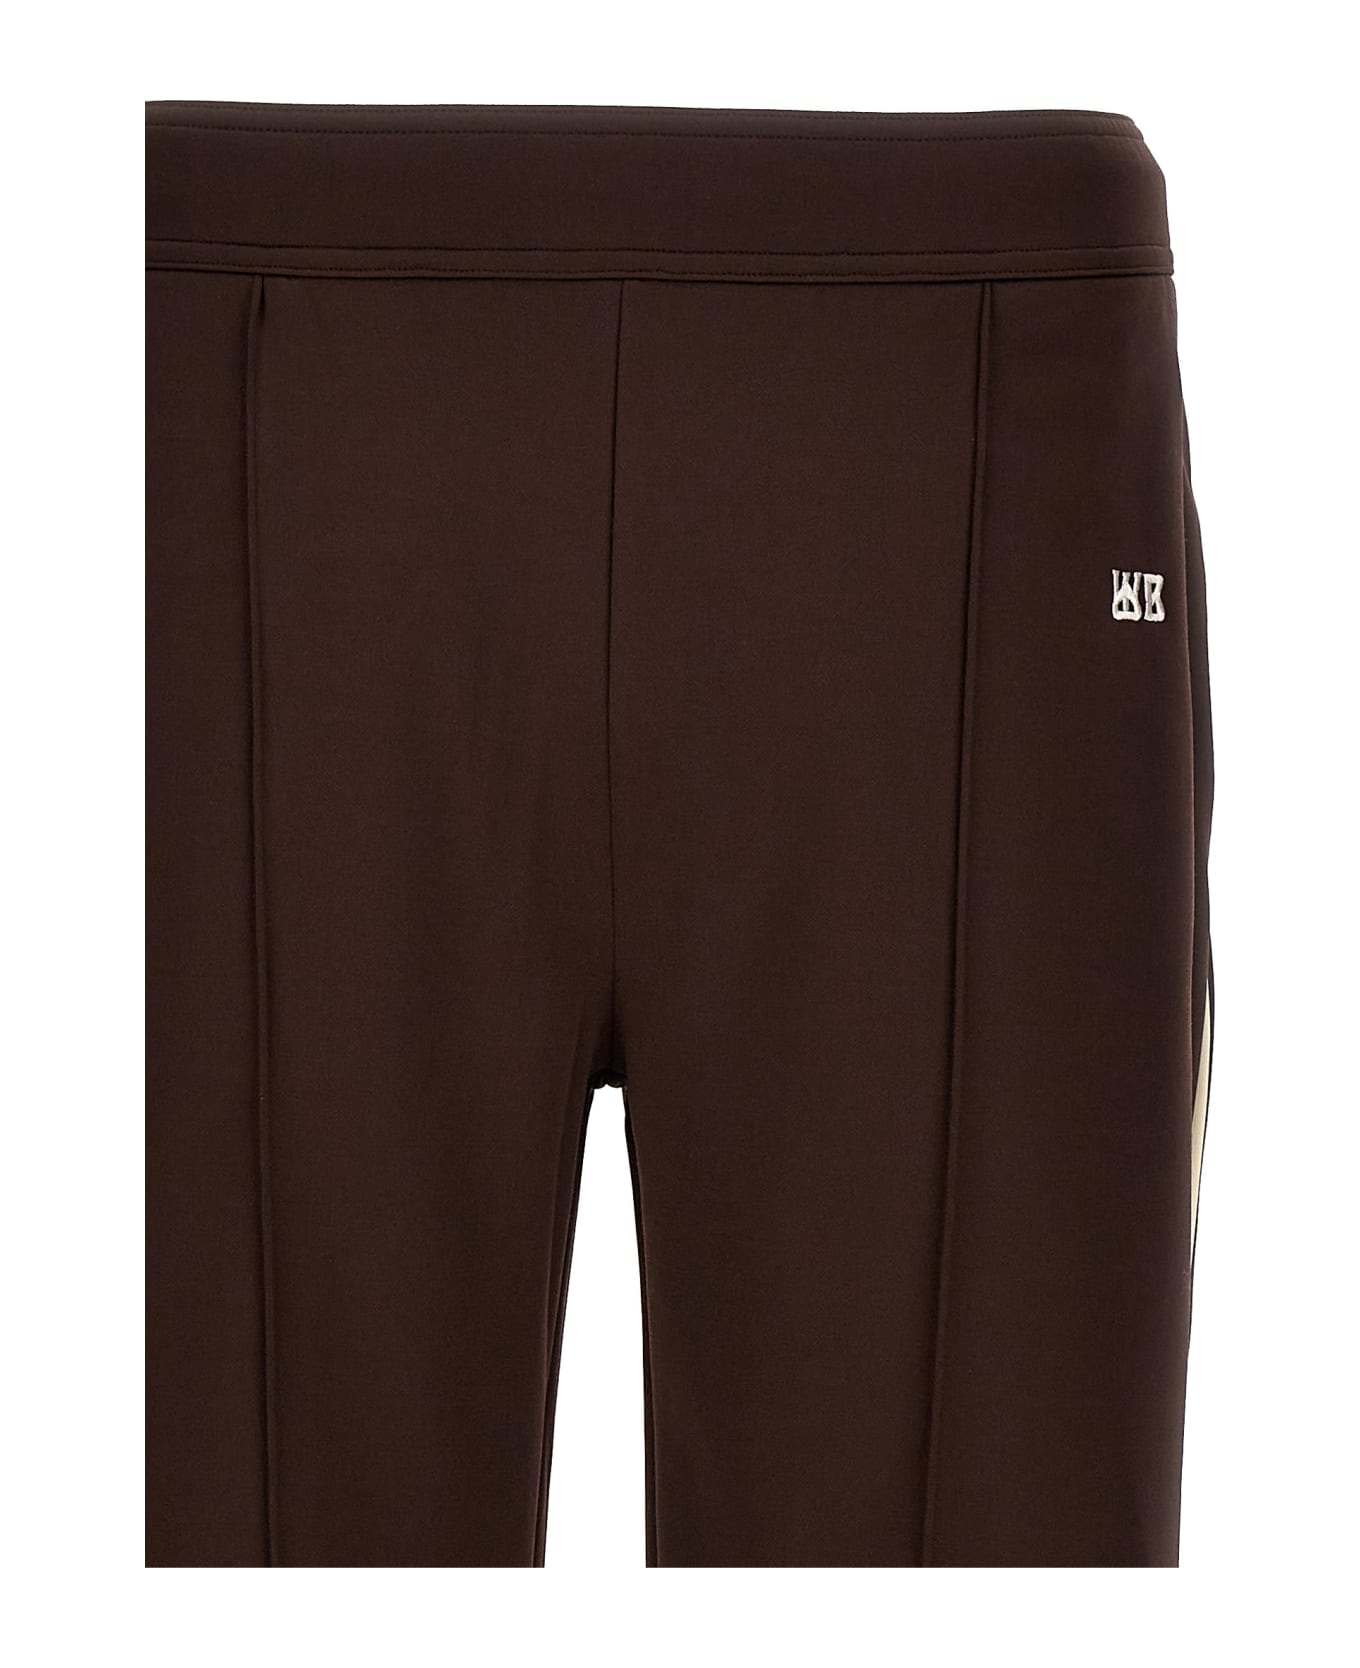 Wales Bonner 'track' Joggers - BROWN